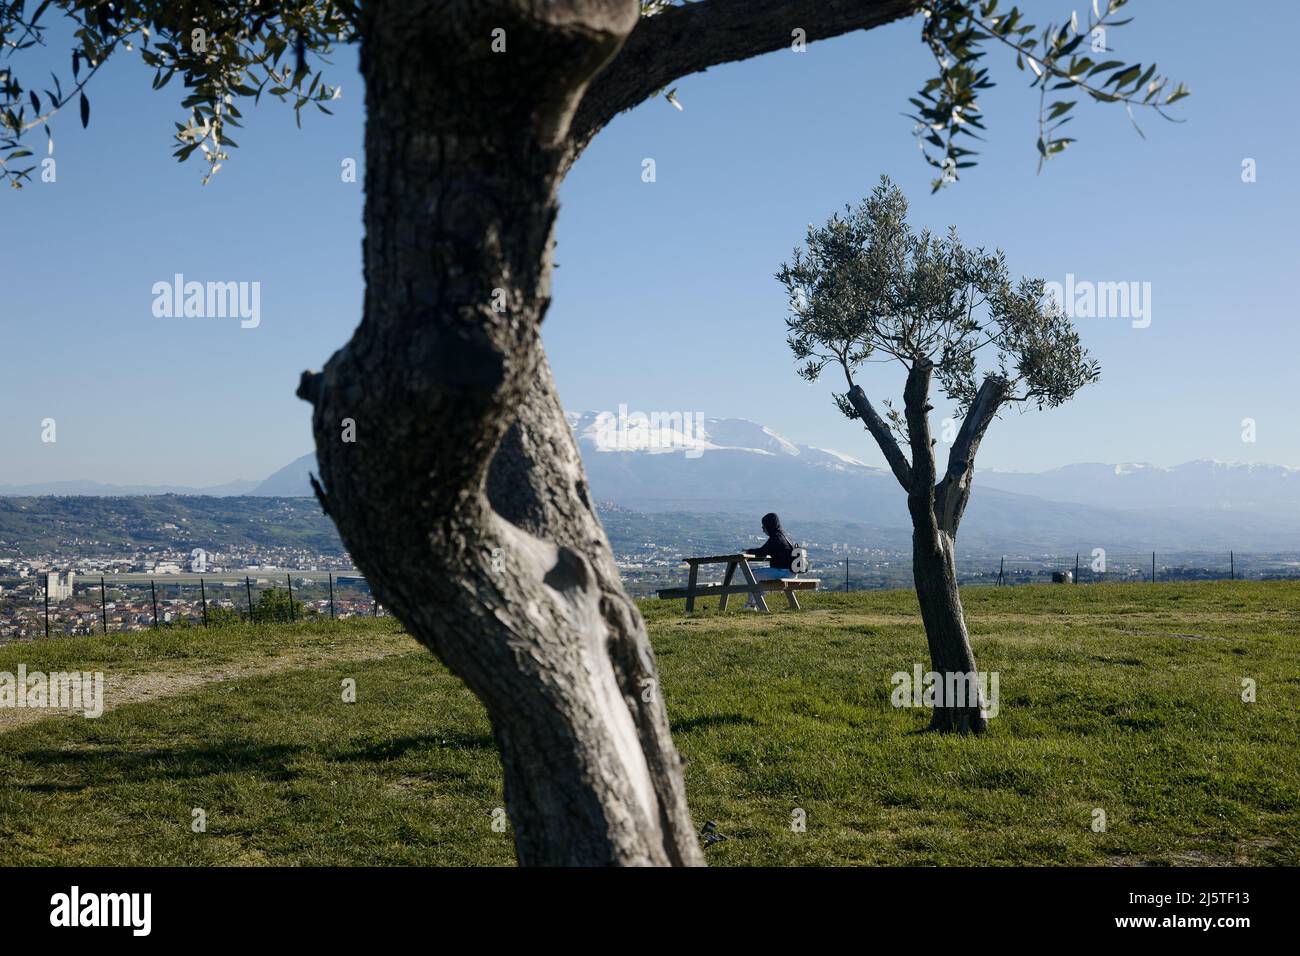 People relaxing in the Parco Colle Del Telegrafo, Pescara, Abruzzo, Italy, April 2022 Stock Photo